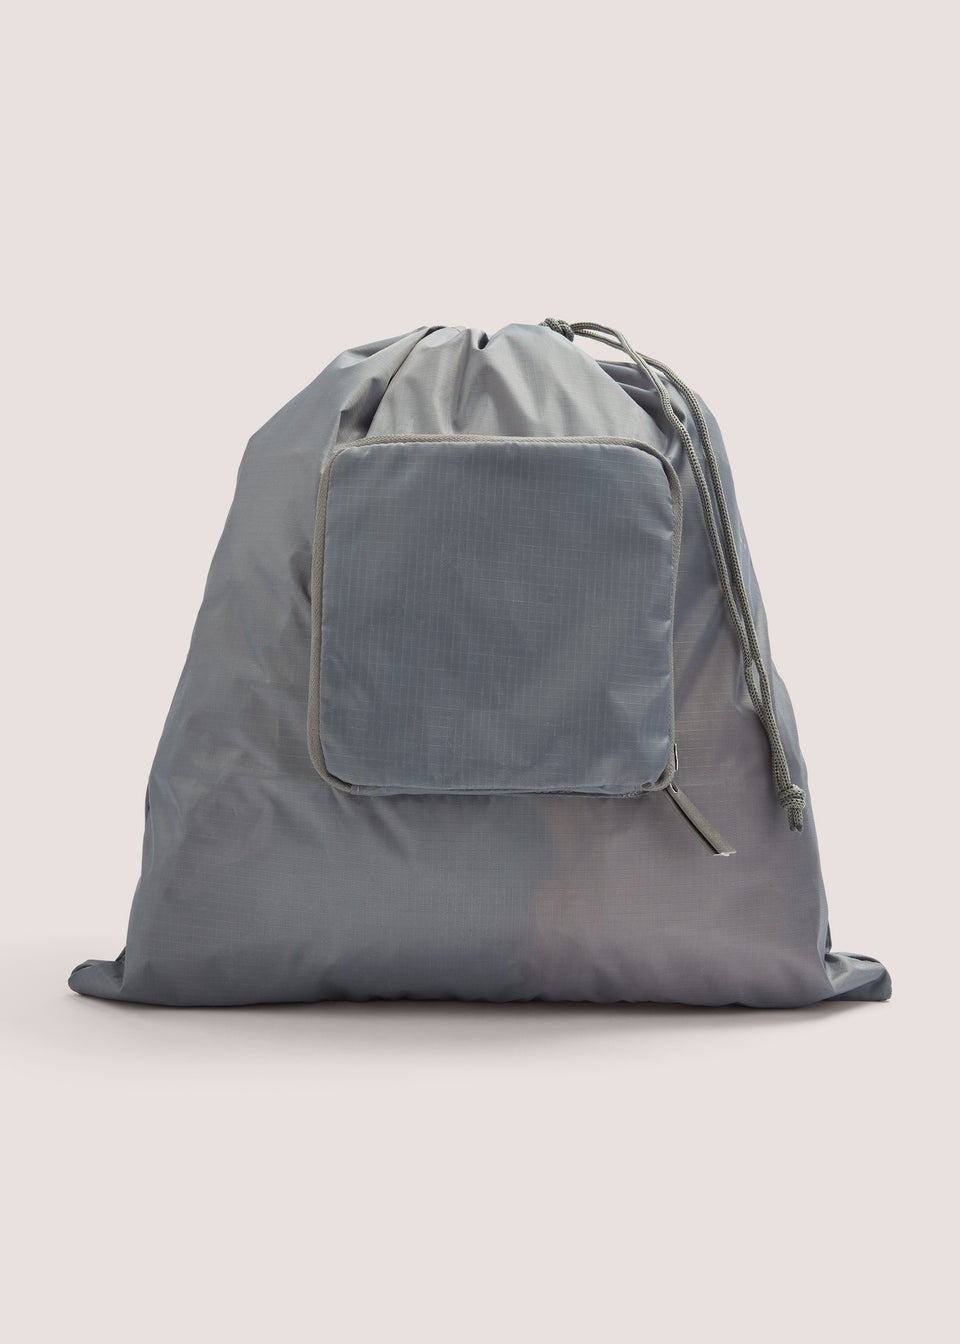 Grey Laundry Drawstring Bag with Cover